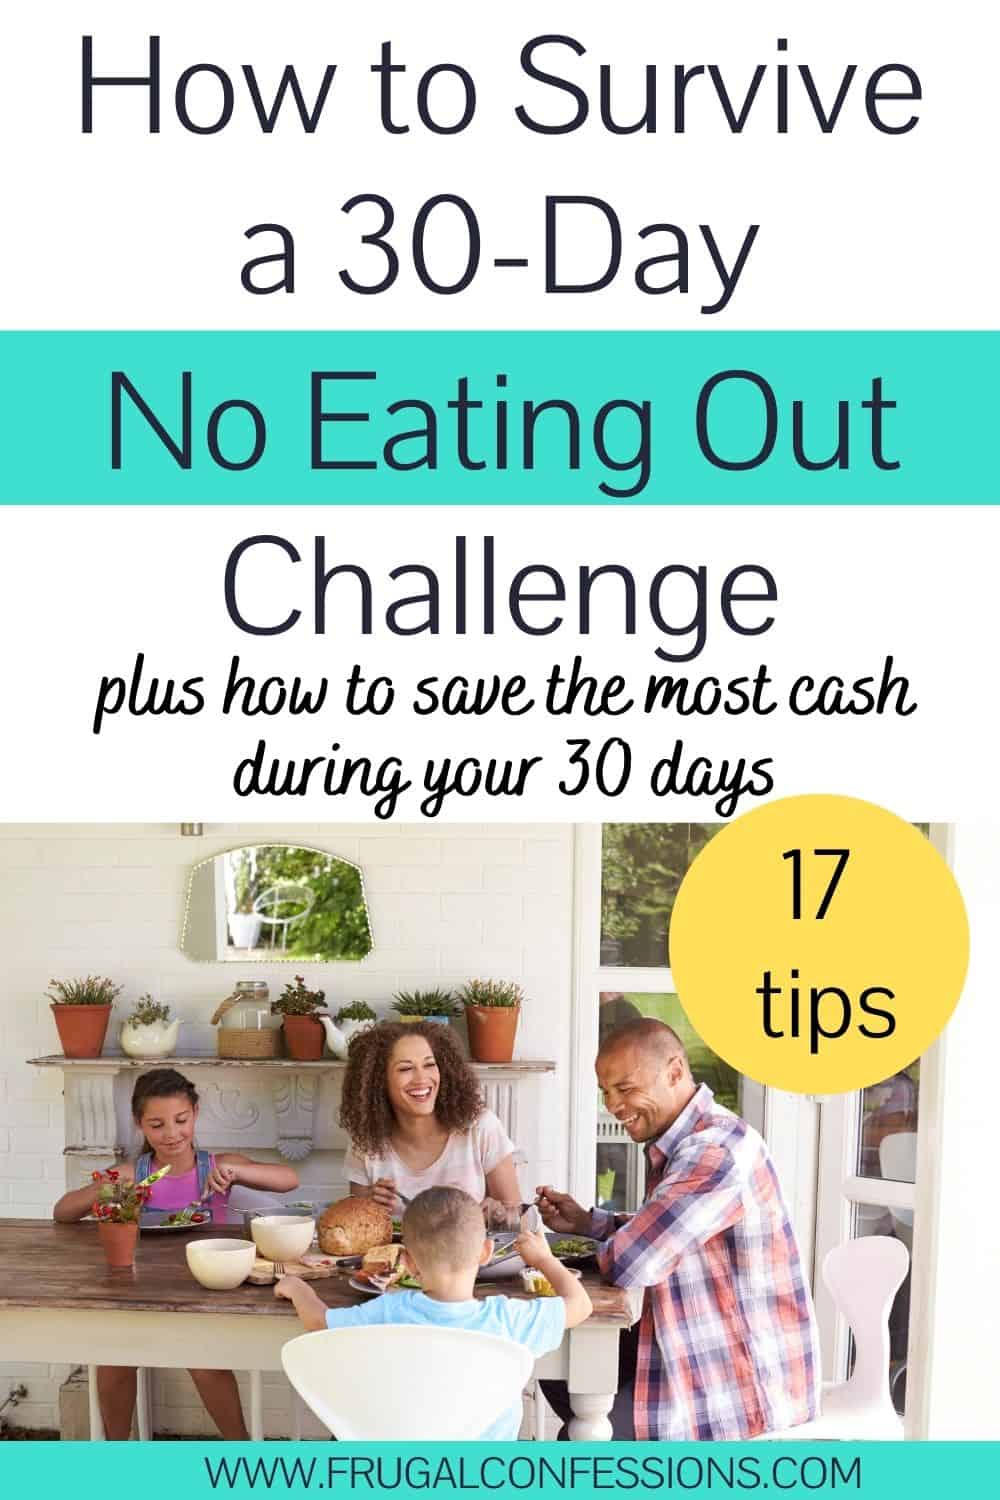 young family having fun eating dinner on back patio, text overlay "How to survive a 30 day no eating out challenge - 17 tips"